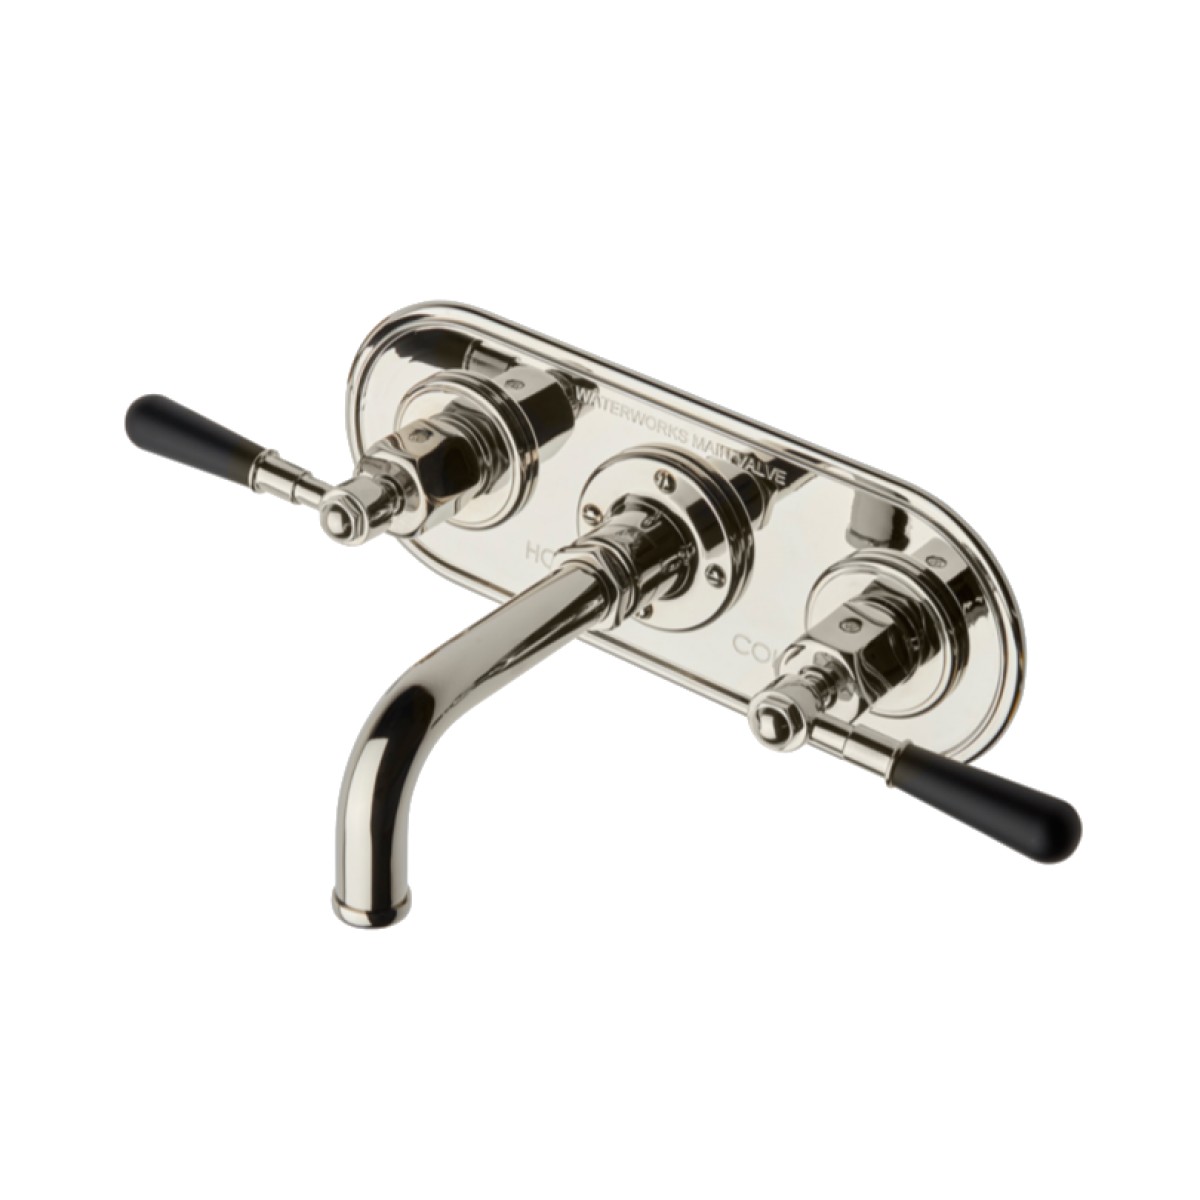 Regulator Wall Mounted Lavatory Faucet with Trim Plate and Two-Tone Lever Handles